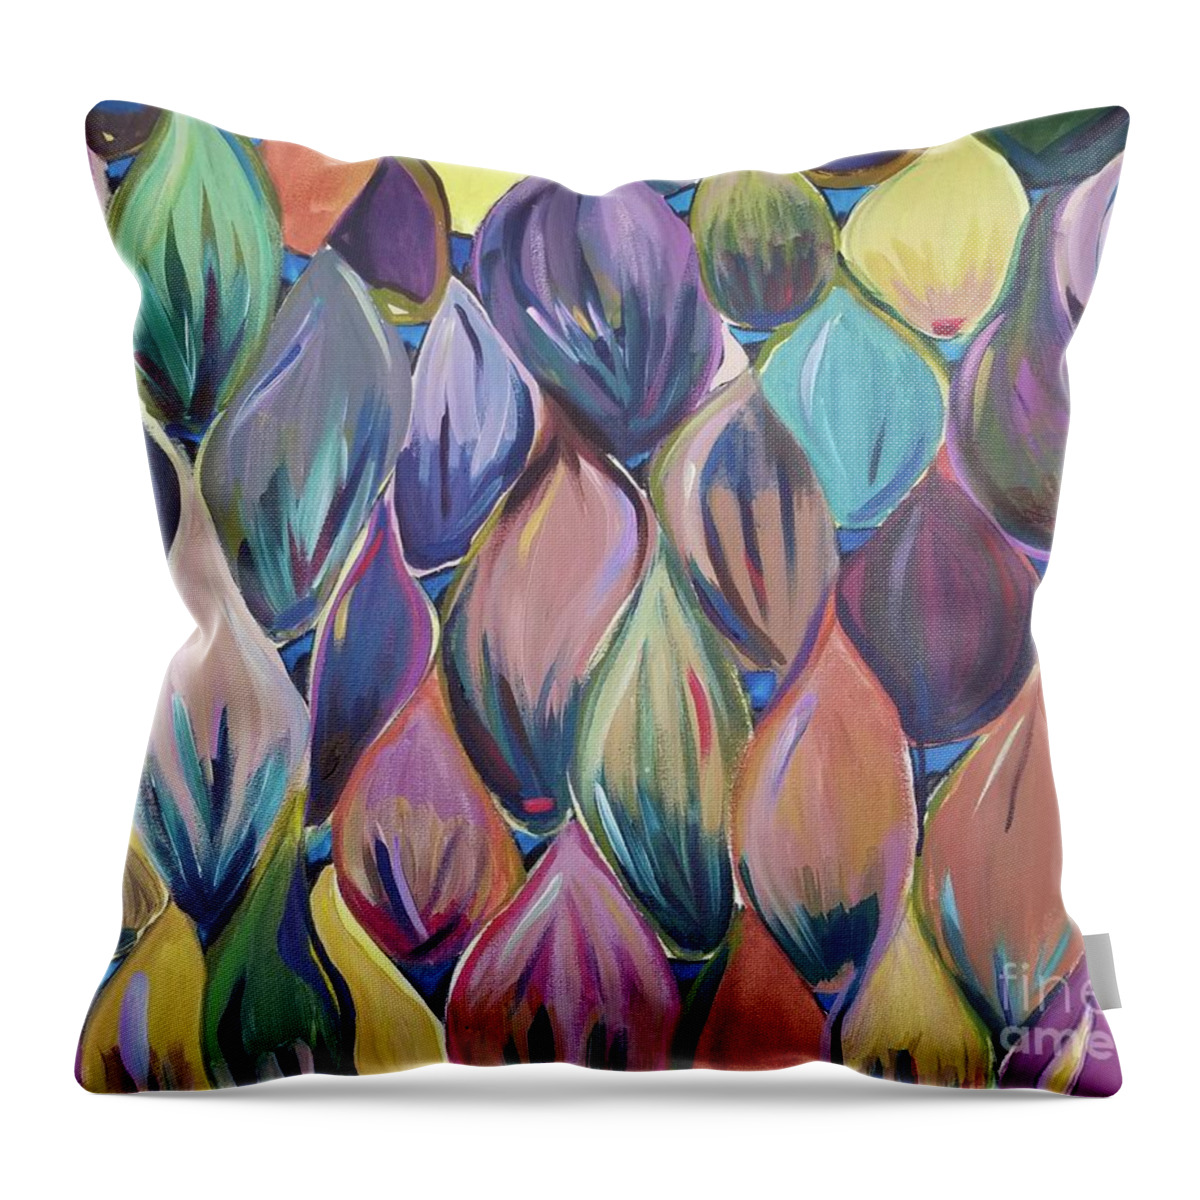 Color Throw Pillow featuring the painting Color Interaction by Catherine Gruetzke-Blais